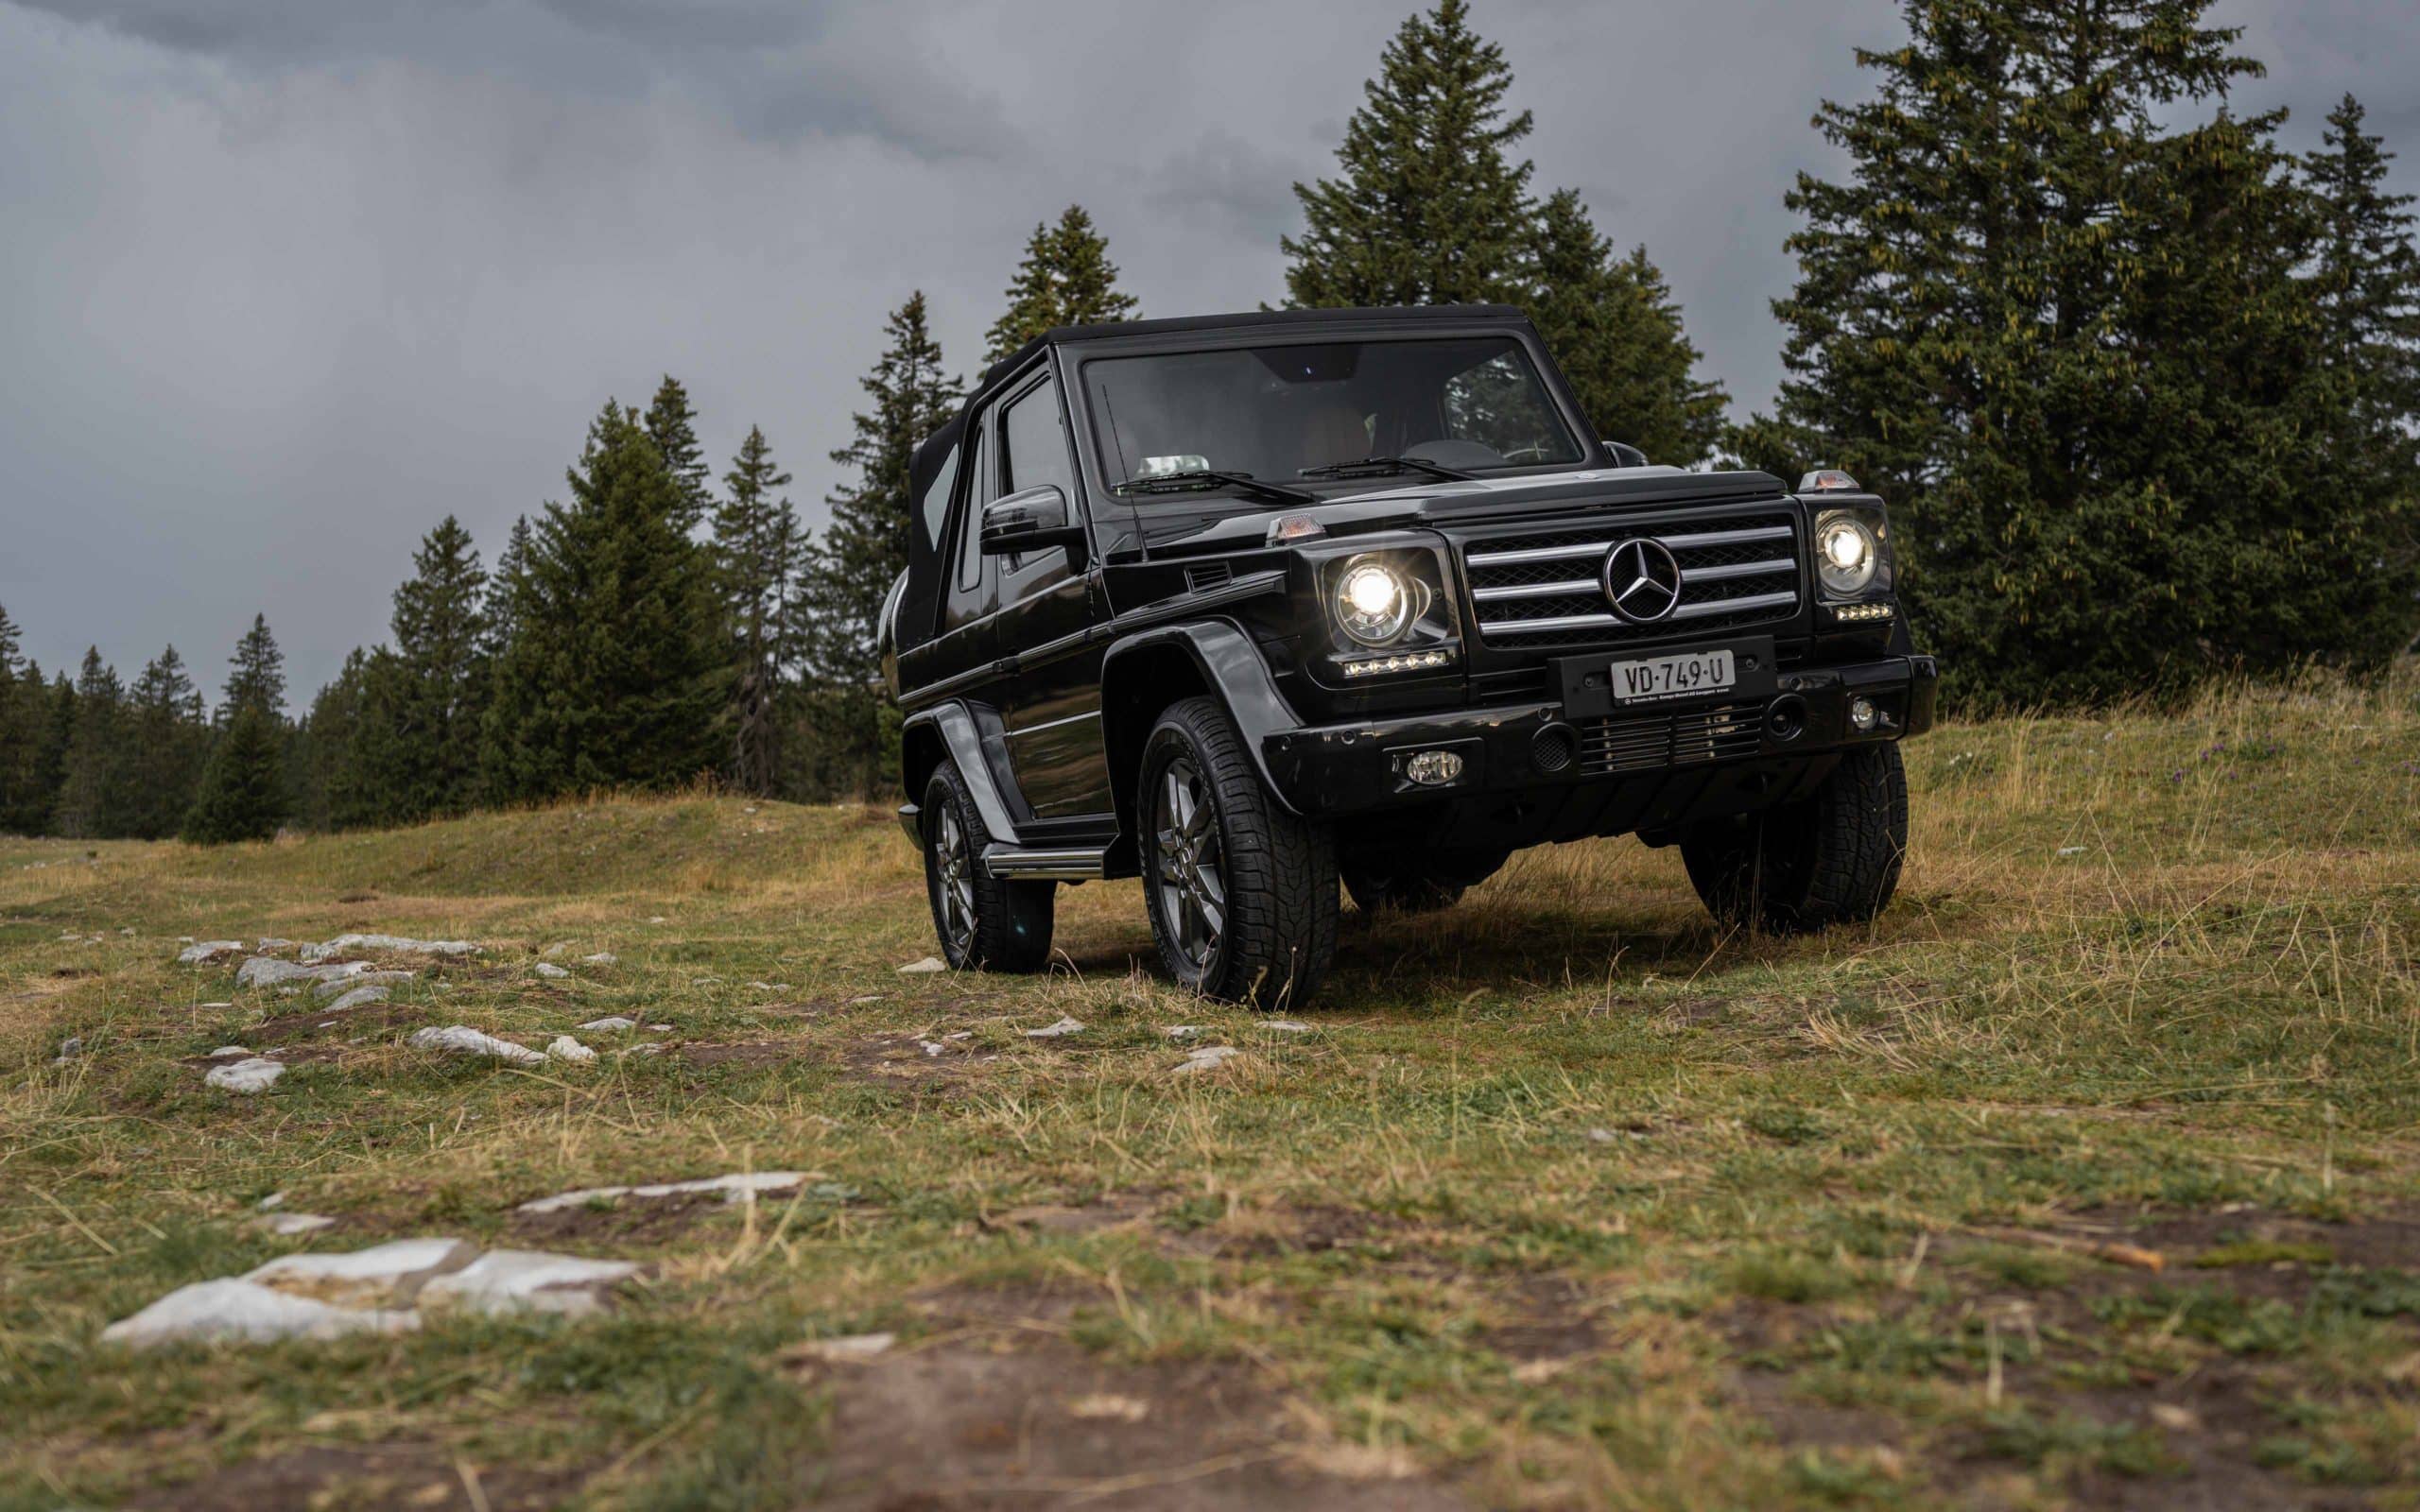 2013 Mercedes-Benz G500 Cabriolet standing on a Mountain Landscape